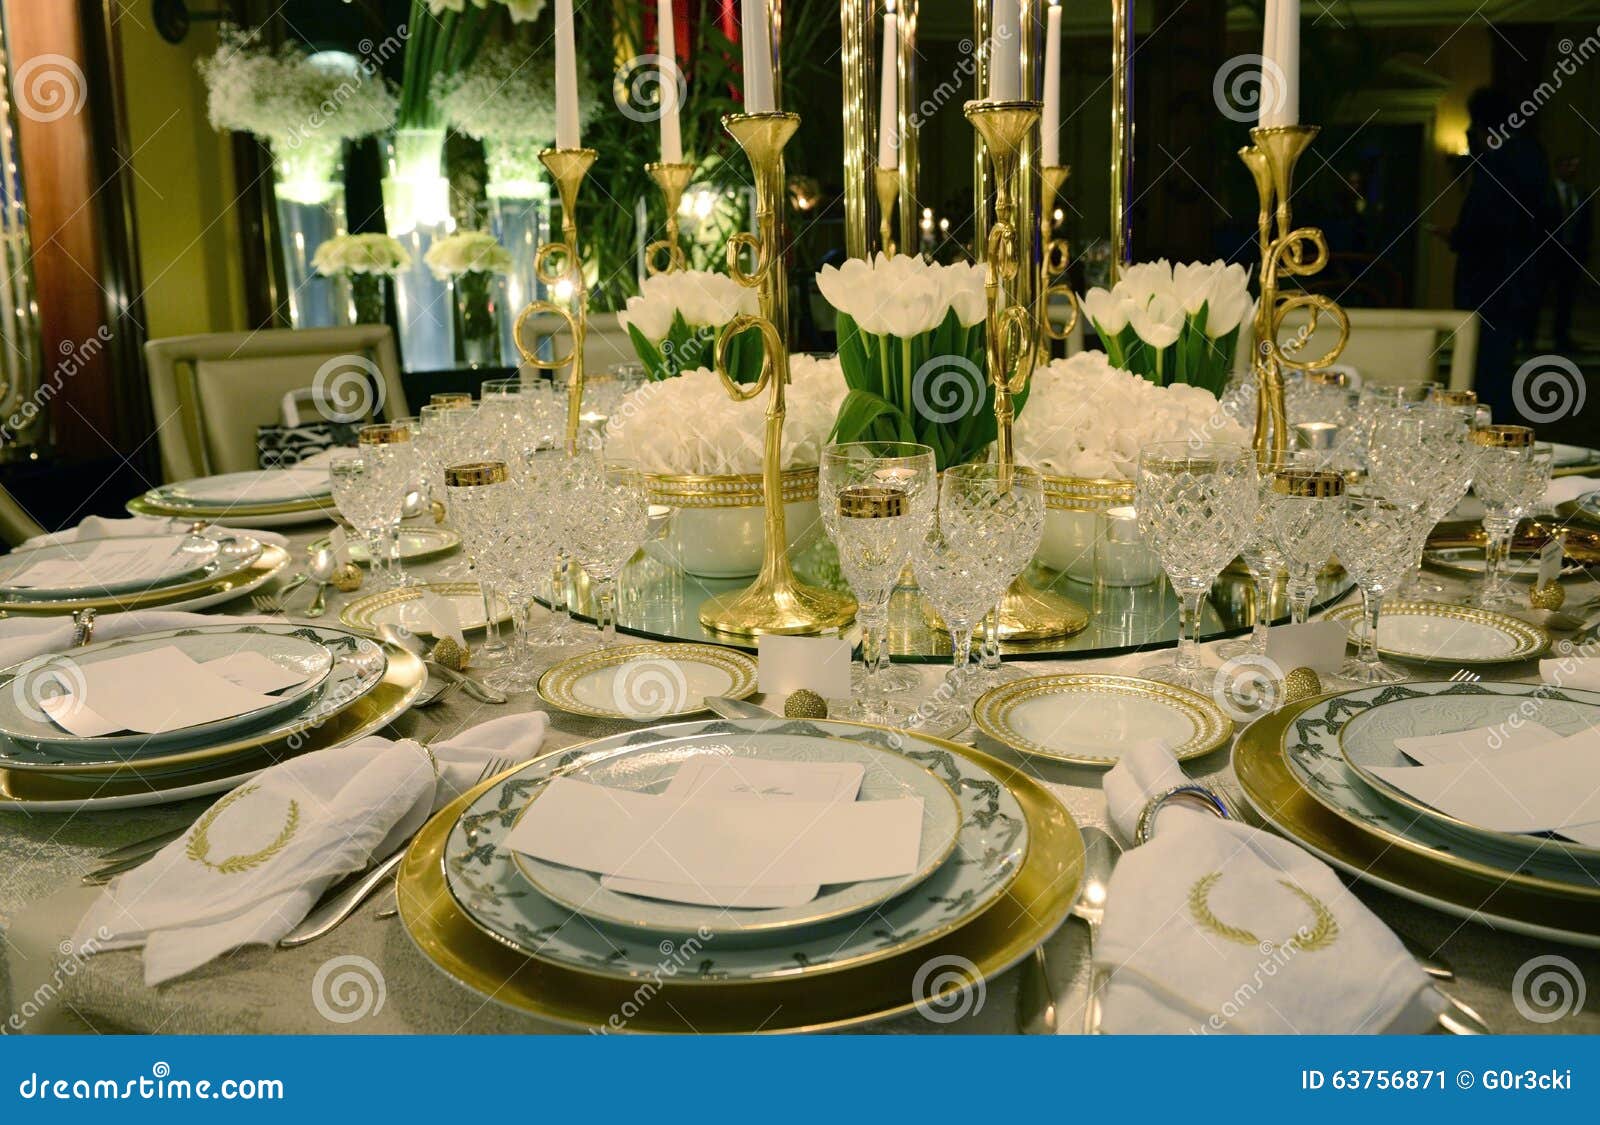 white and golden table decoration with white flowers, event